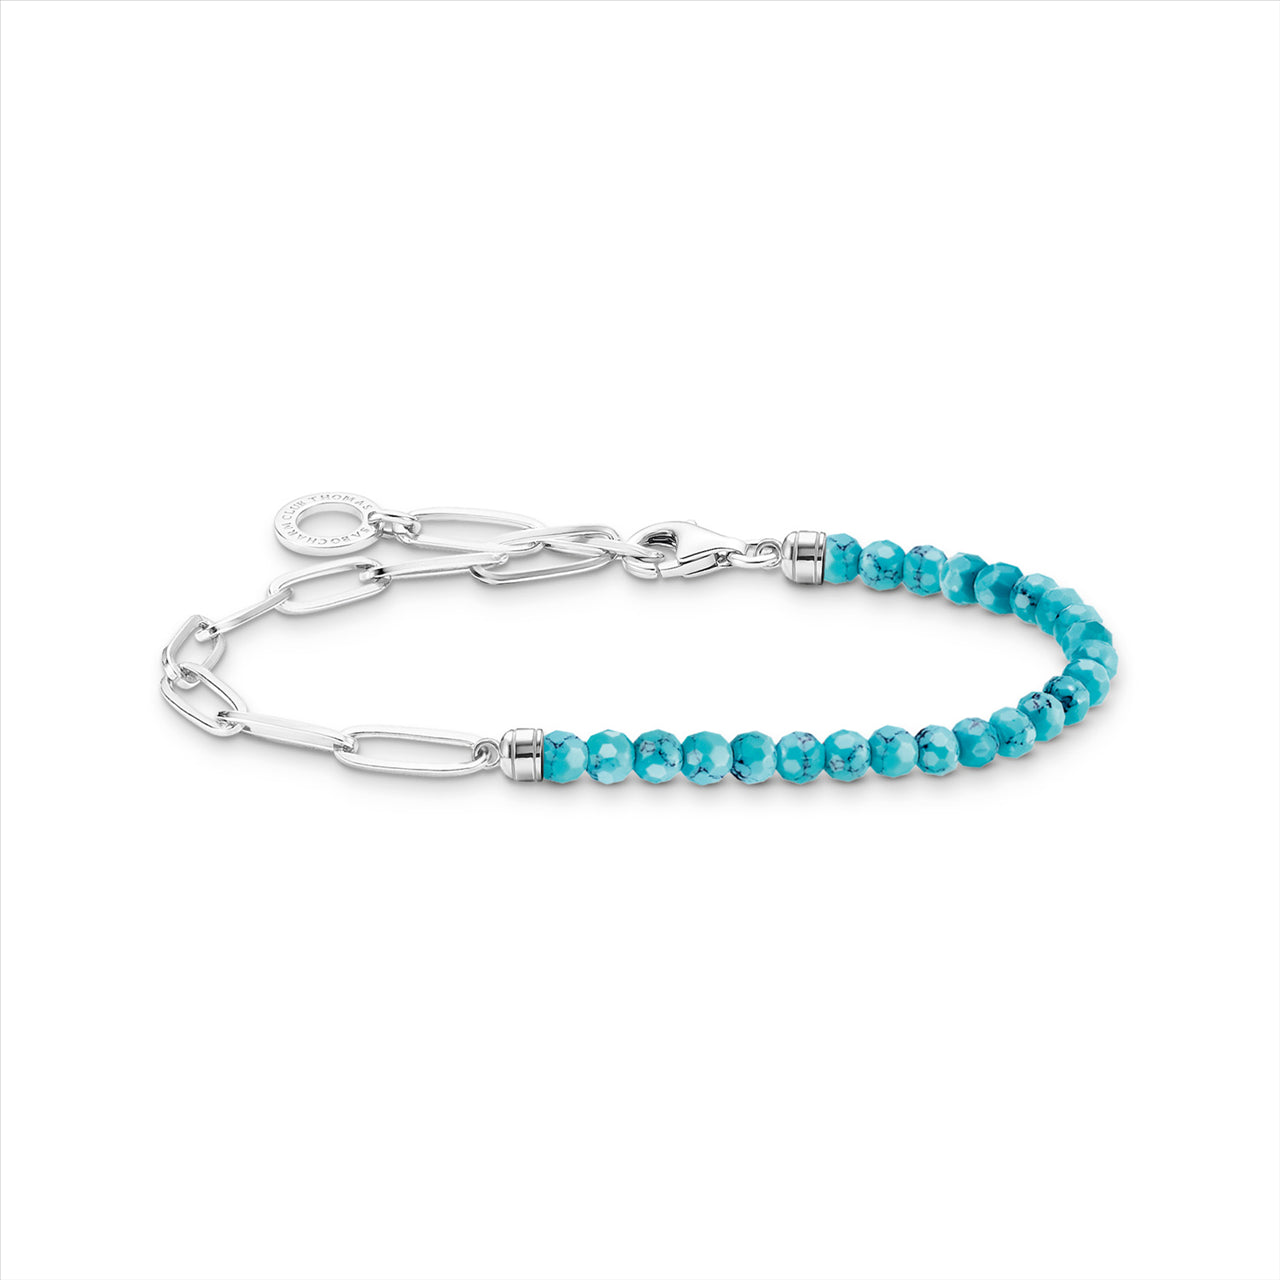 Thomas Sabo Belcher Chain and Turquoise Beaded bracelet.